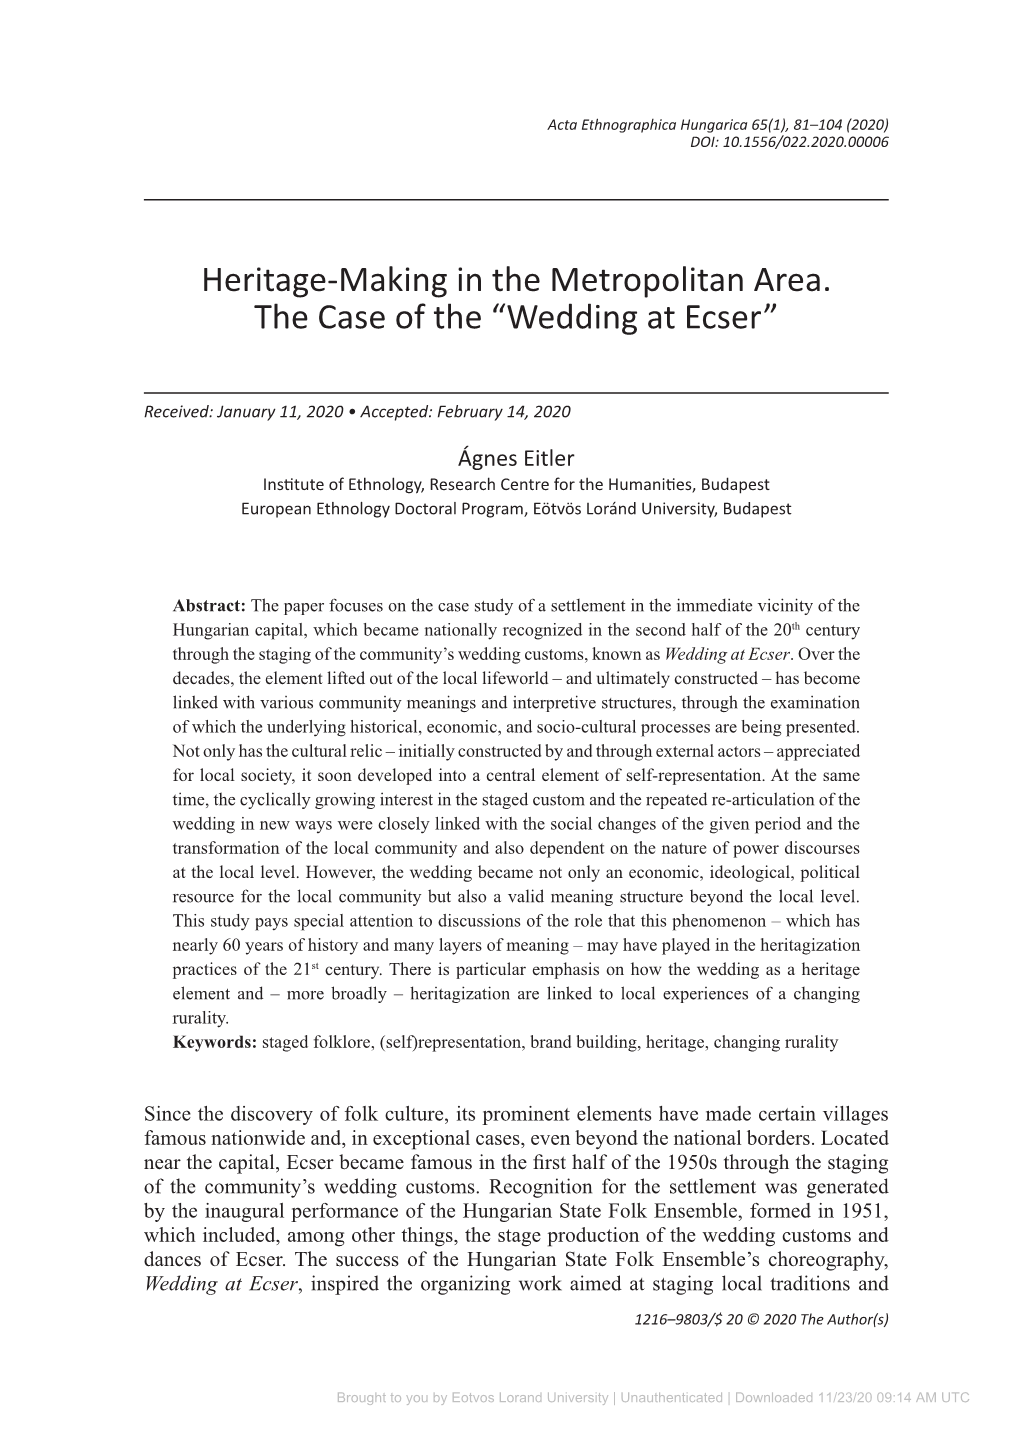 Heritage-Making in the Metropolitan Area. the Case of the “Wedding at Ecser”